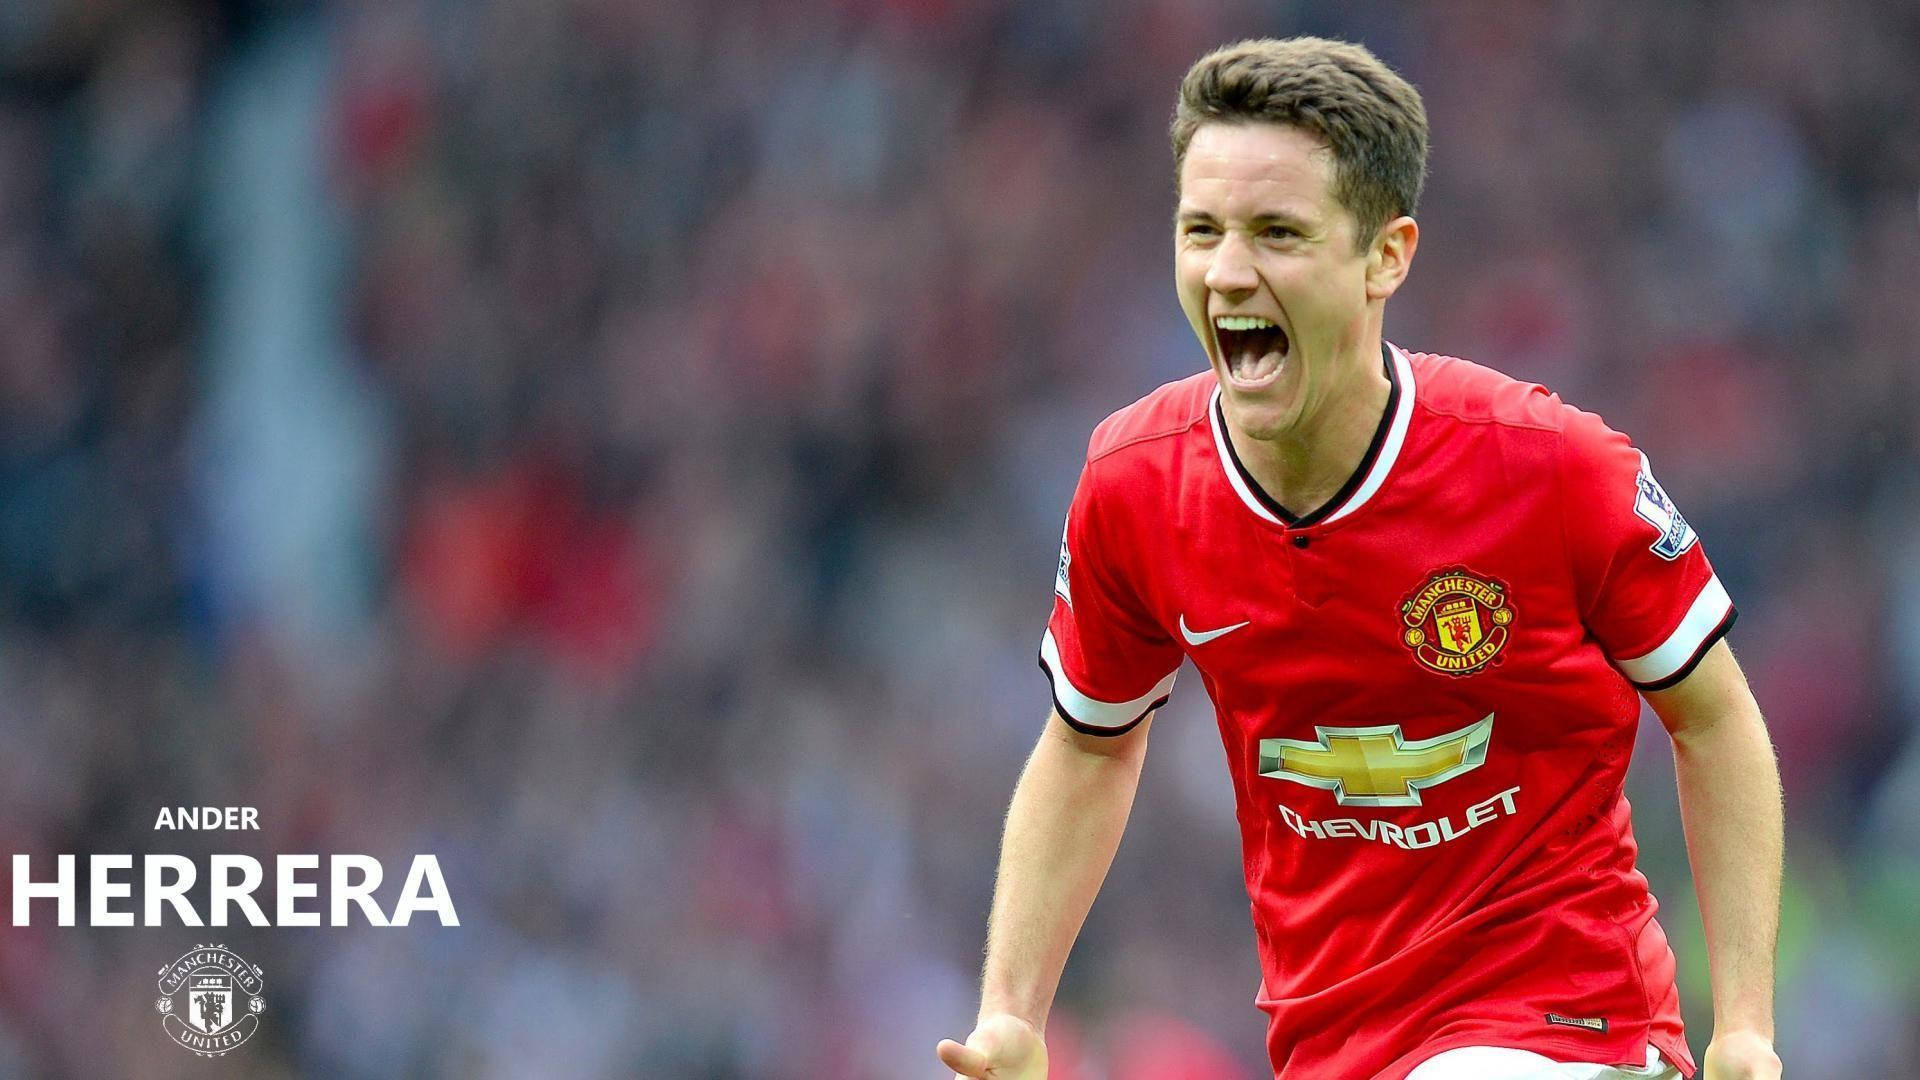 Ander Herrera Manchester United Players Feature Wallpaper